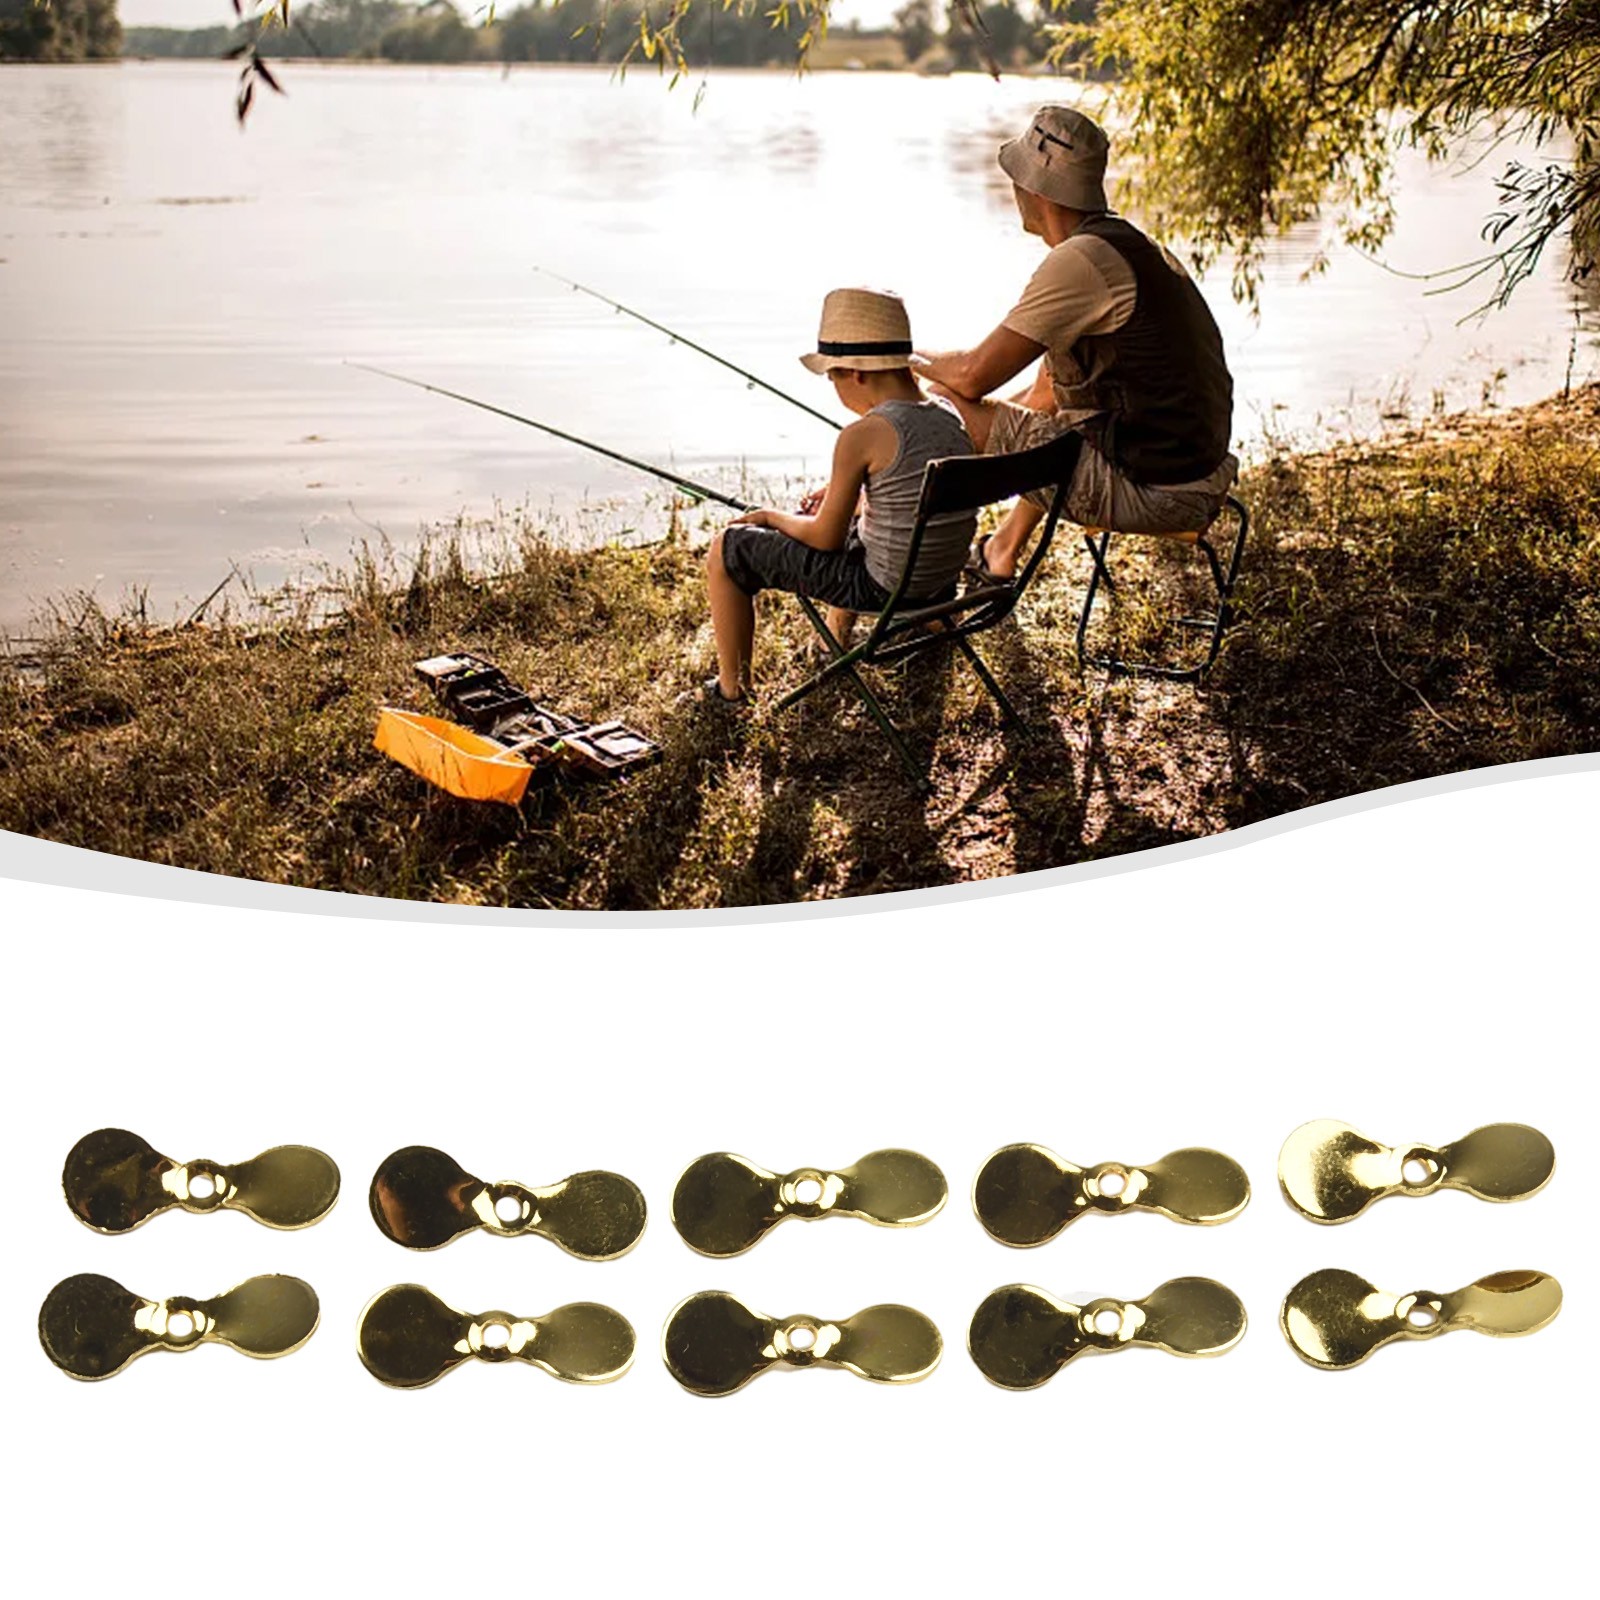 Reflective Turbo Propeller Spinner Blades for Successful Fishing Set of 10